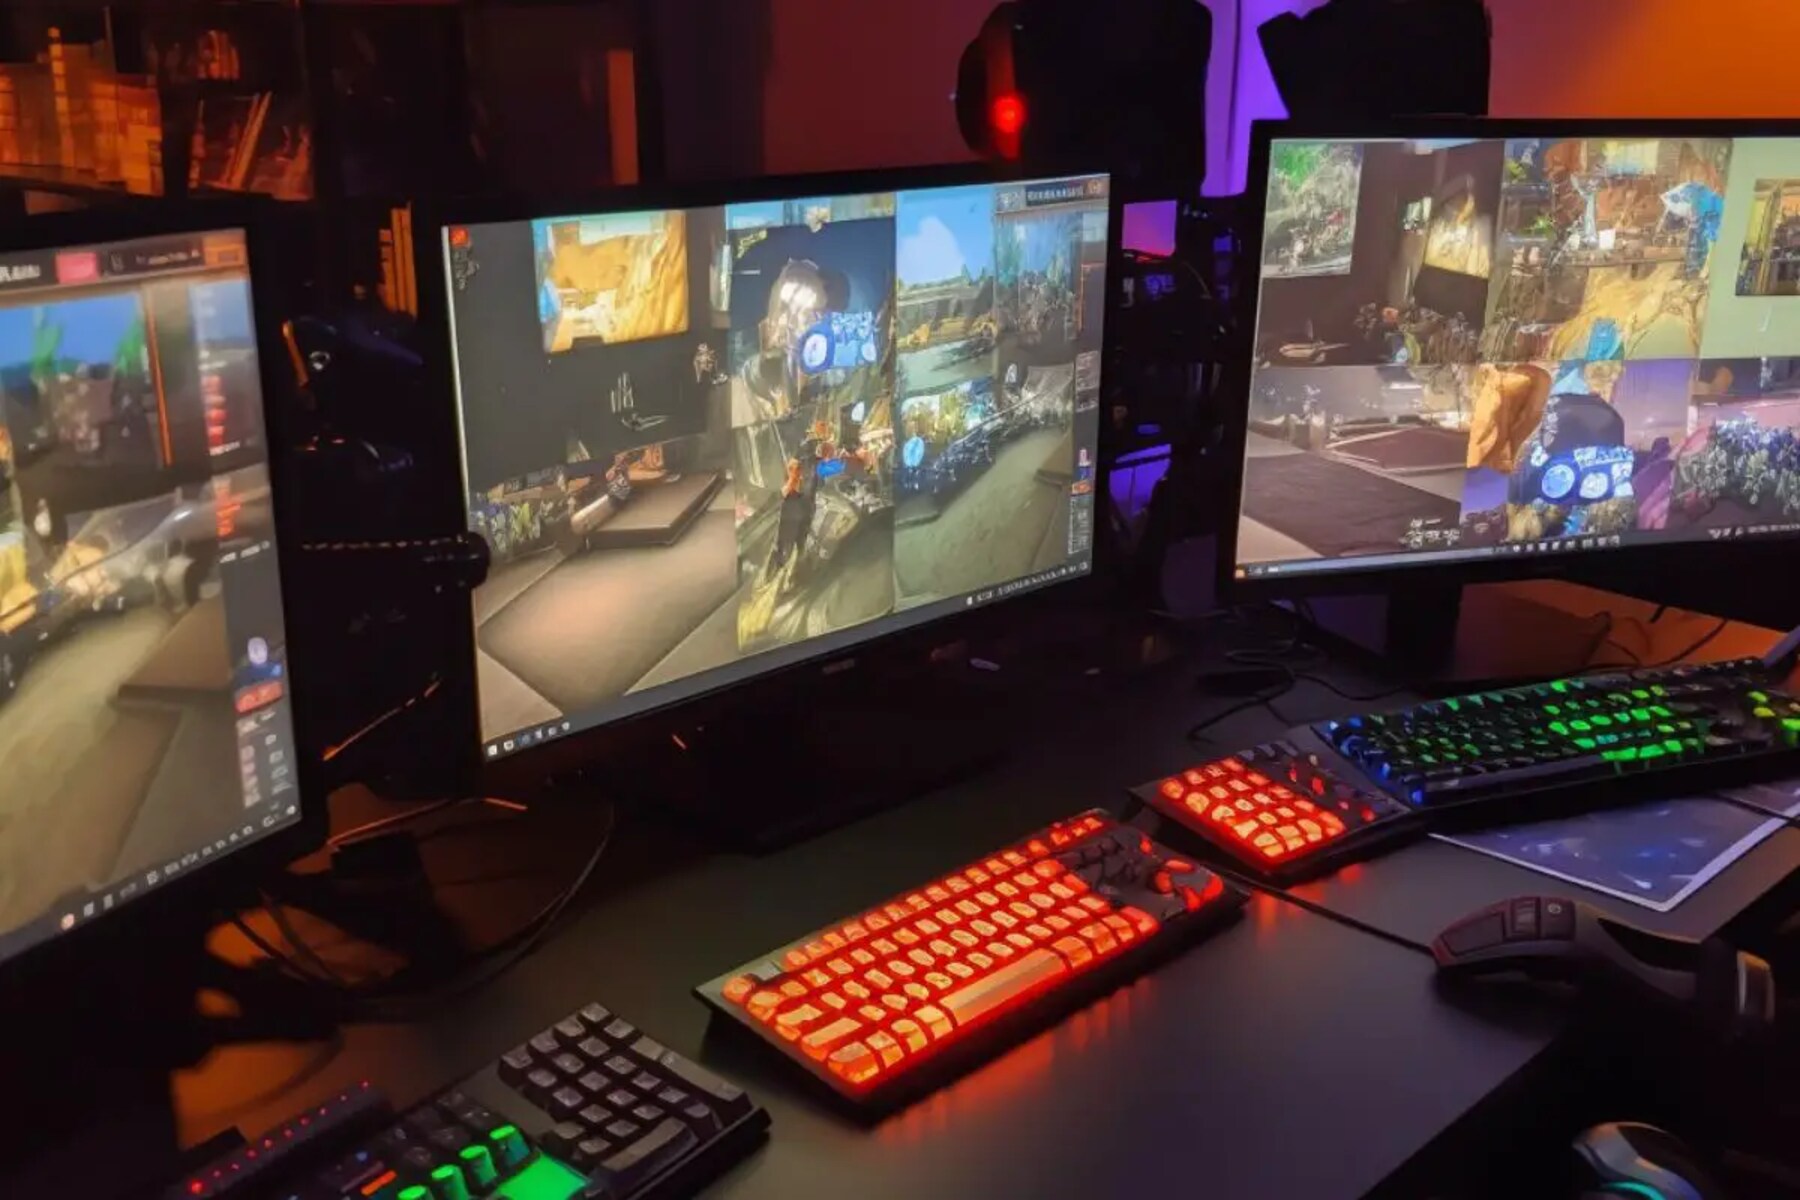 what-gaming-monitor-wall-mount-does-timthetatman-use